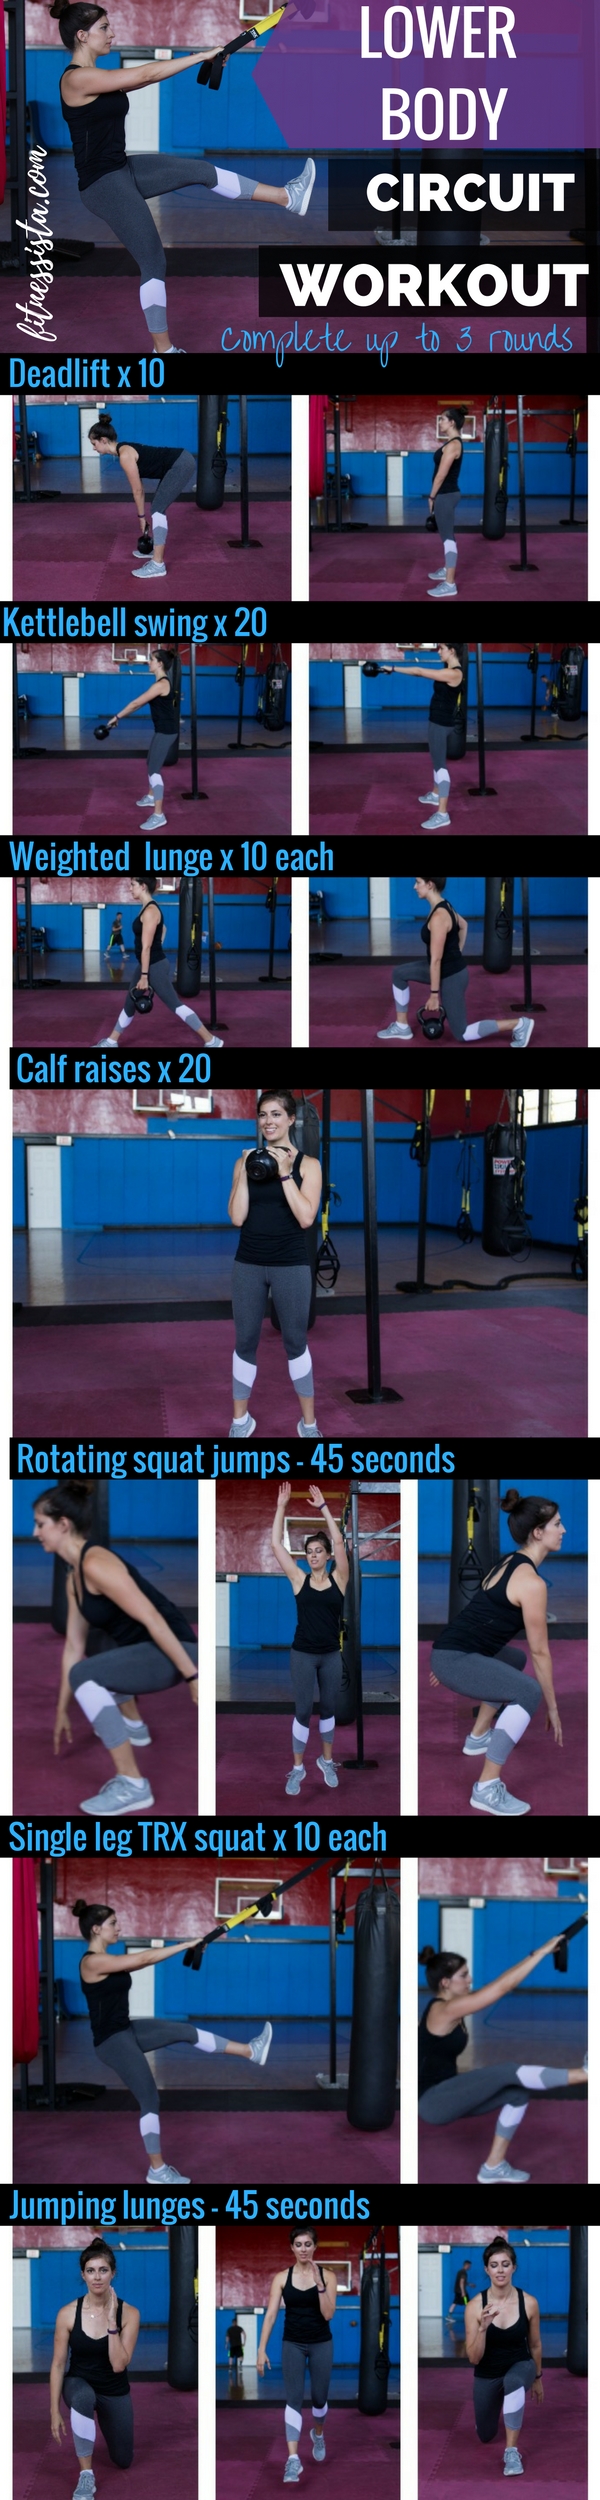 Lower body circuit workout